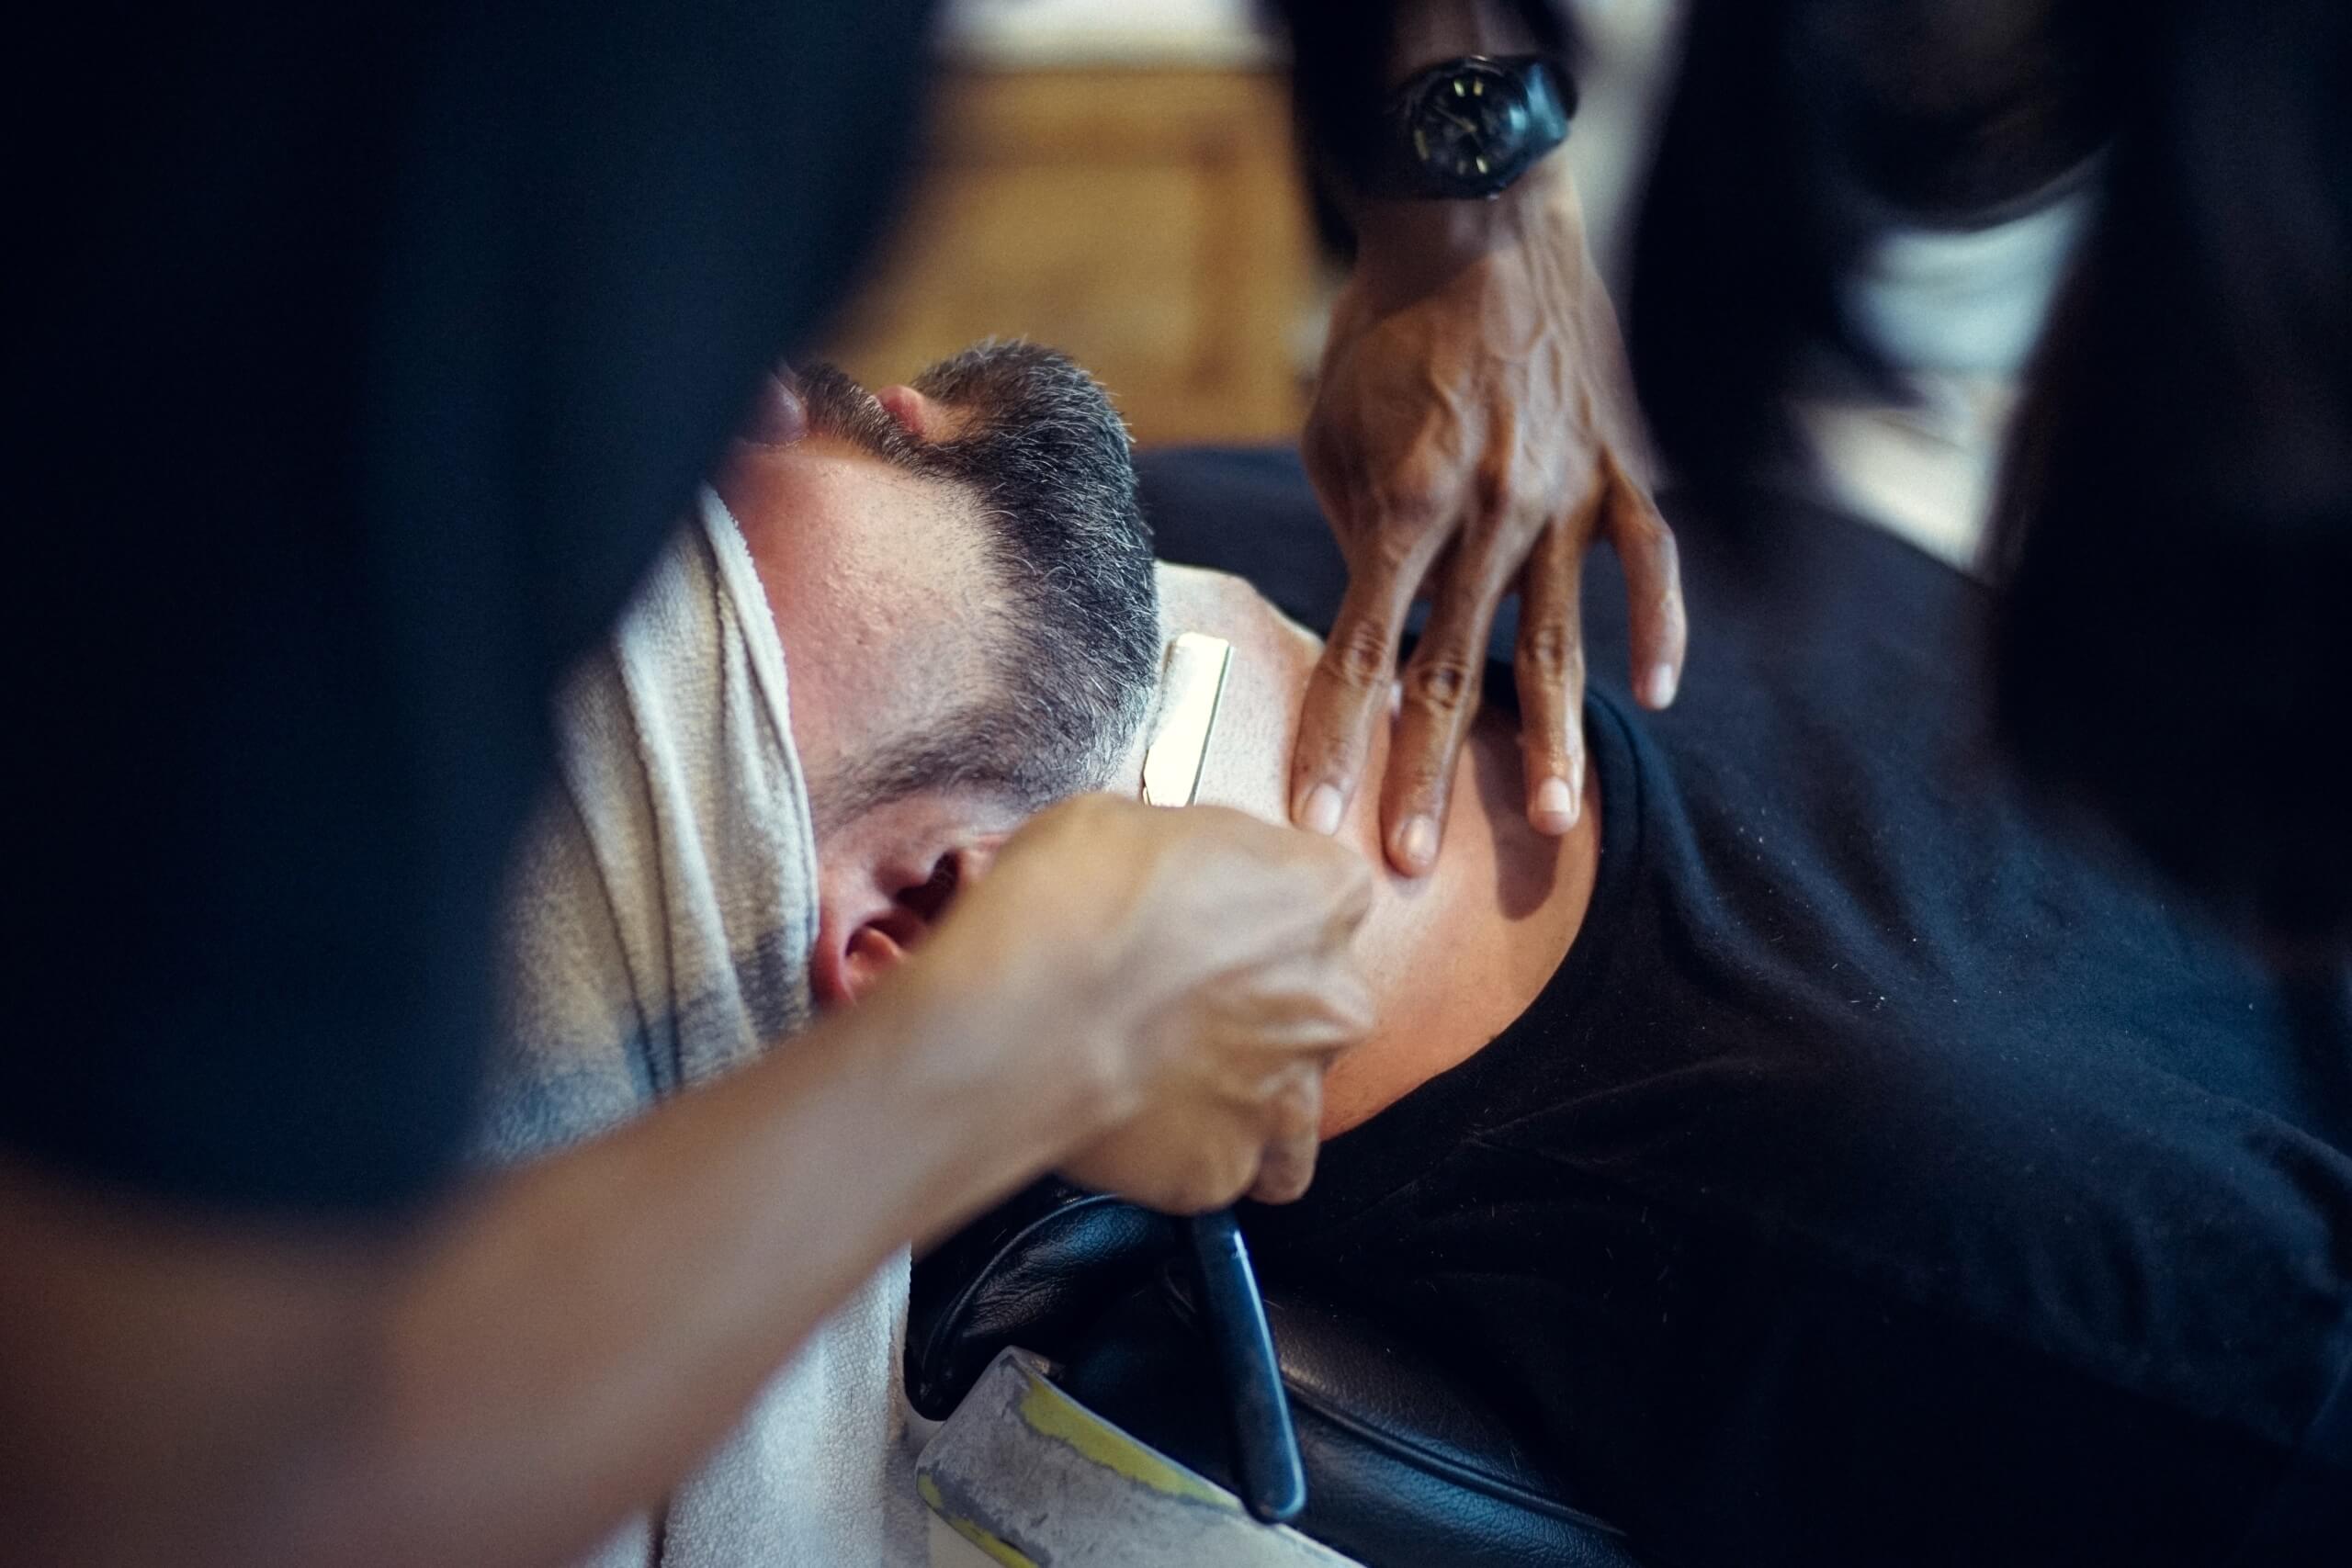 Man getting a shave at a barber shop